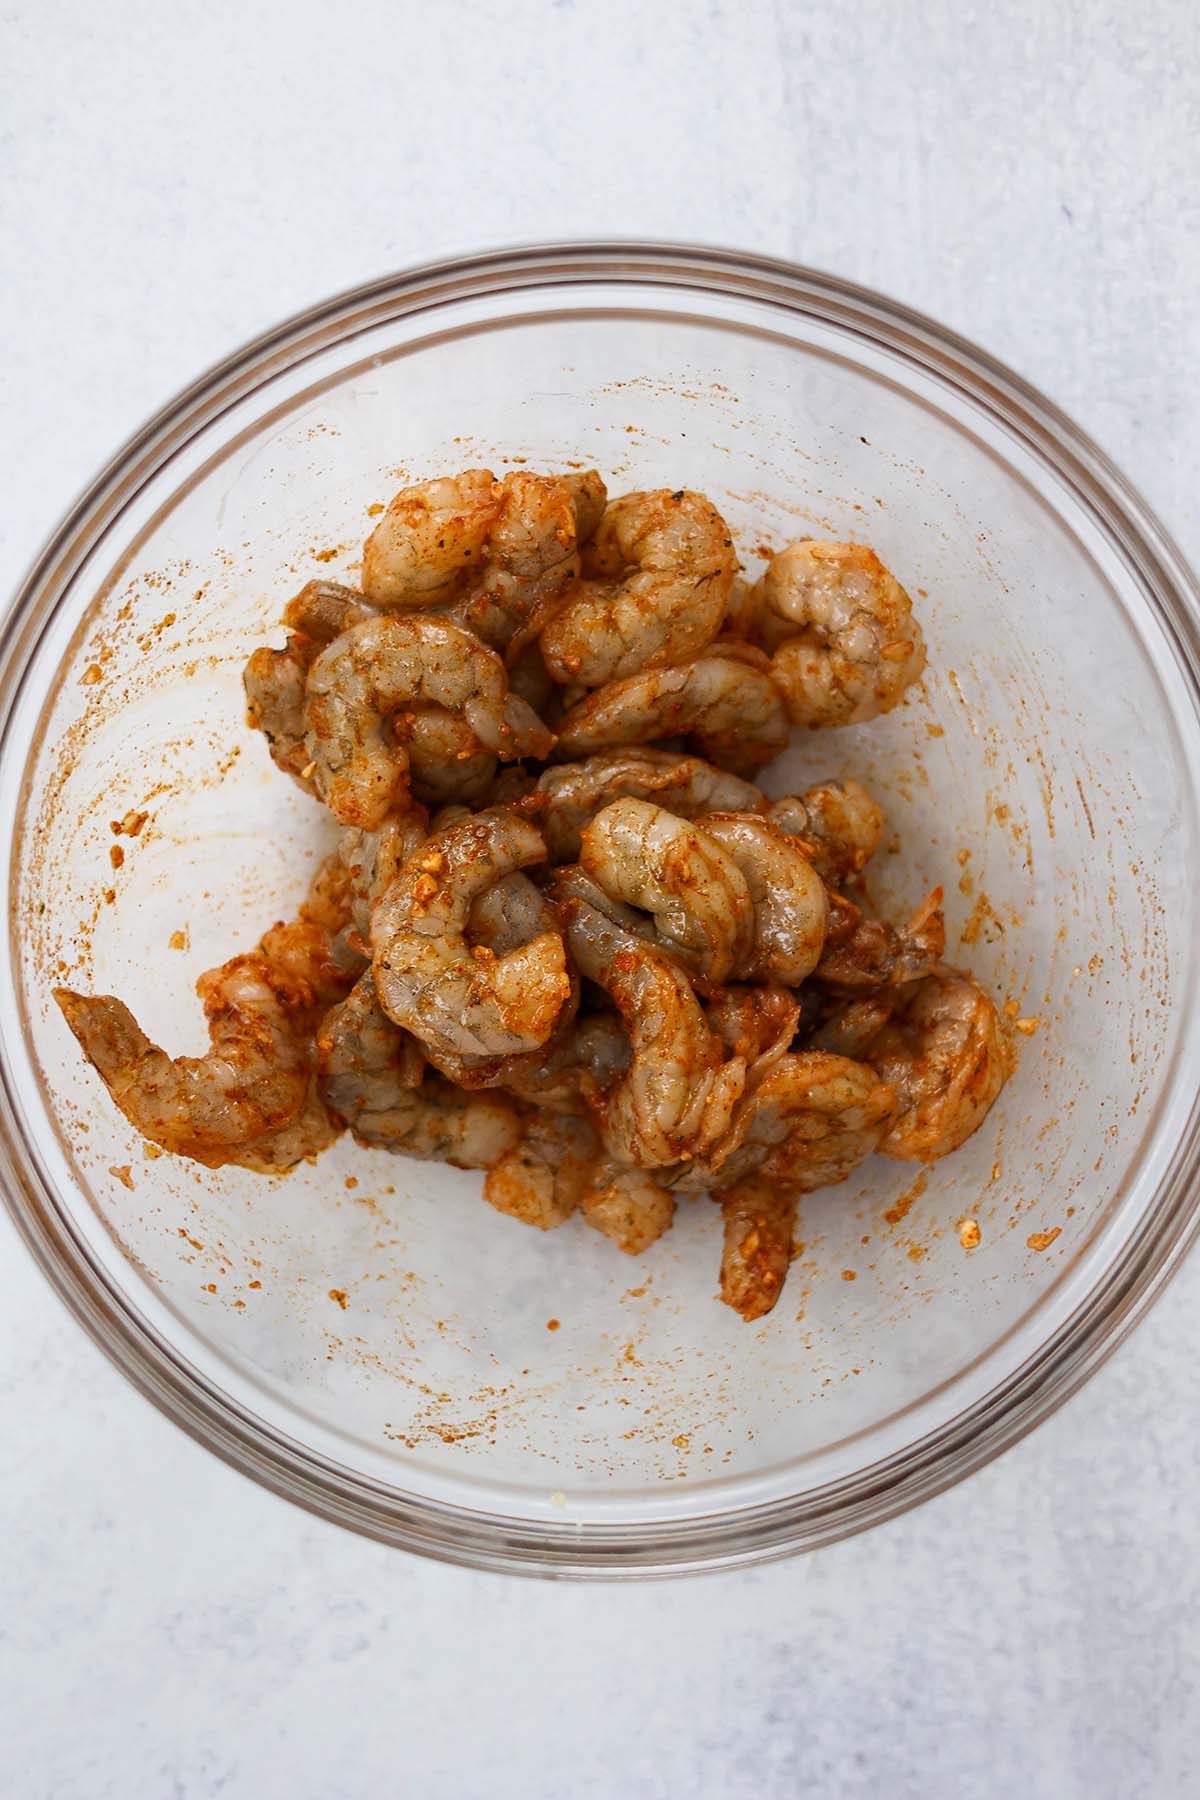 raw shrimp coated in oil and spices in a bowl.